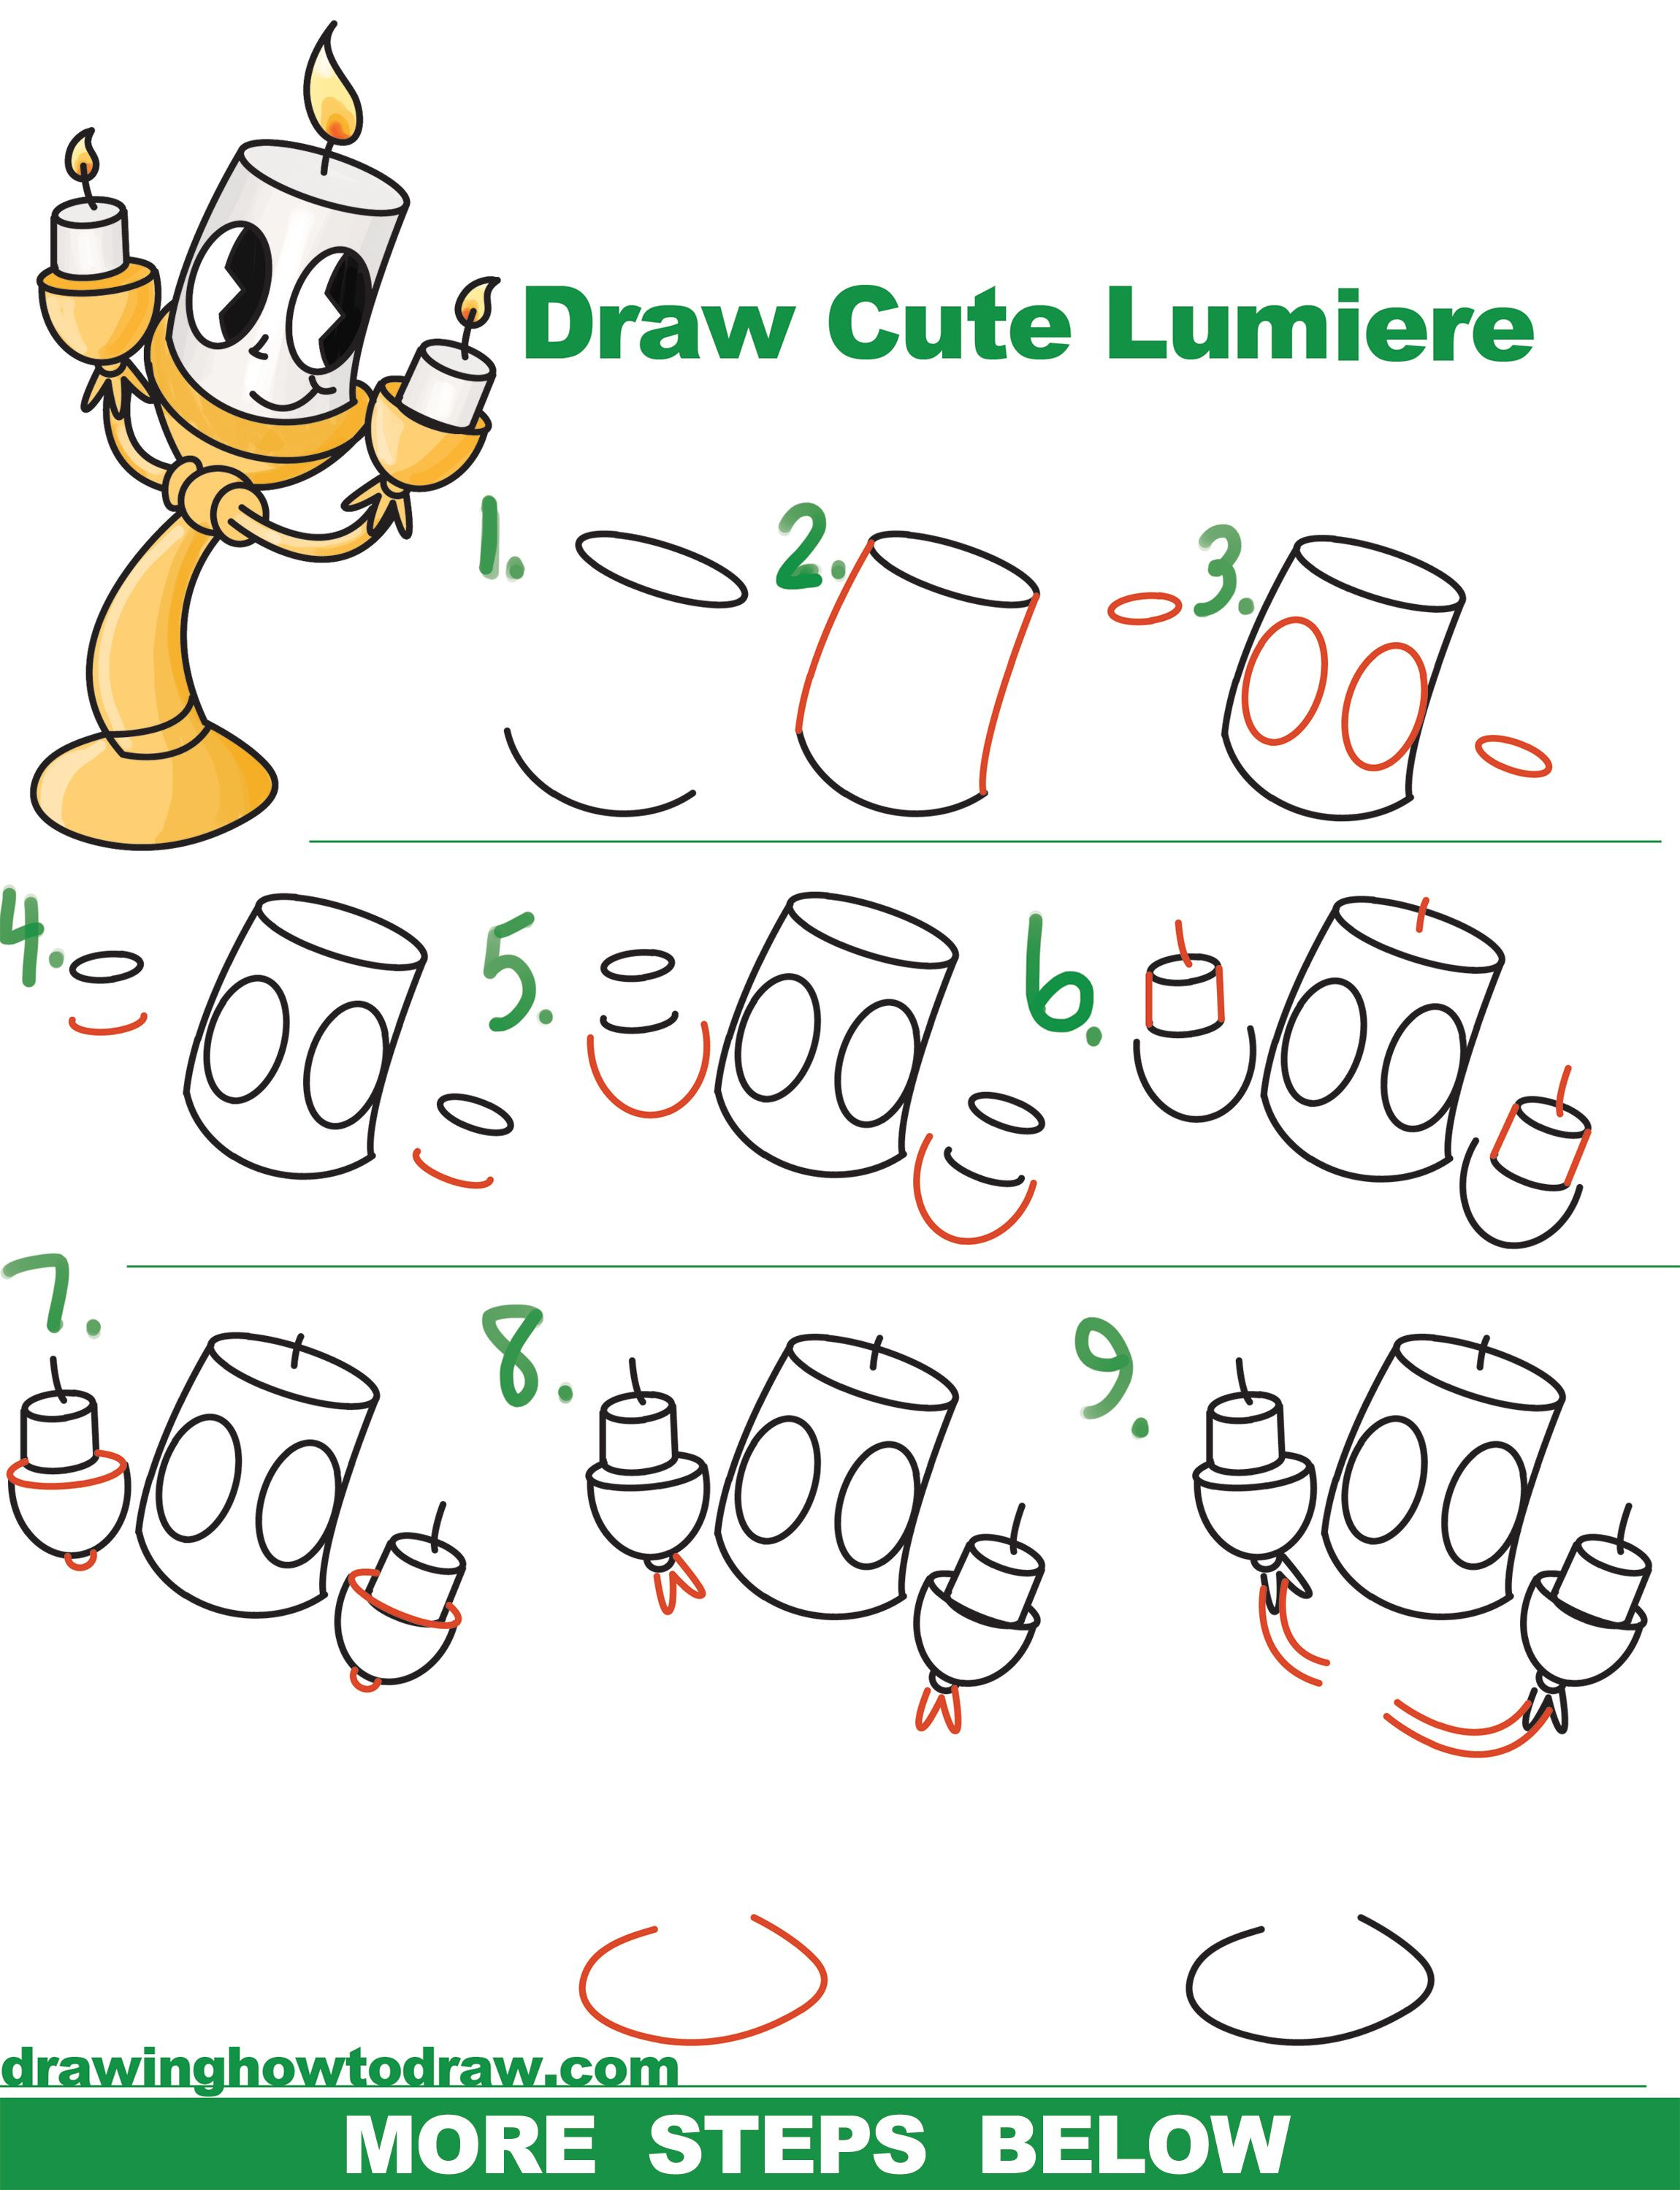 Cartoon Characters Drawing Step By Step at PaintingValley.com | Explore